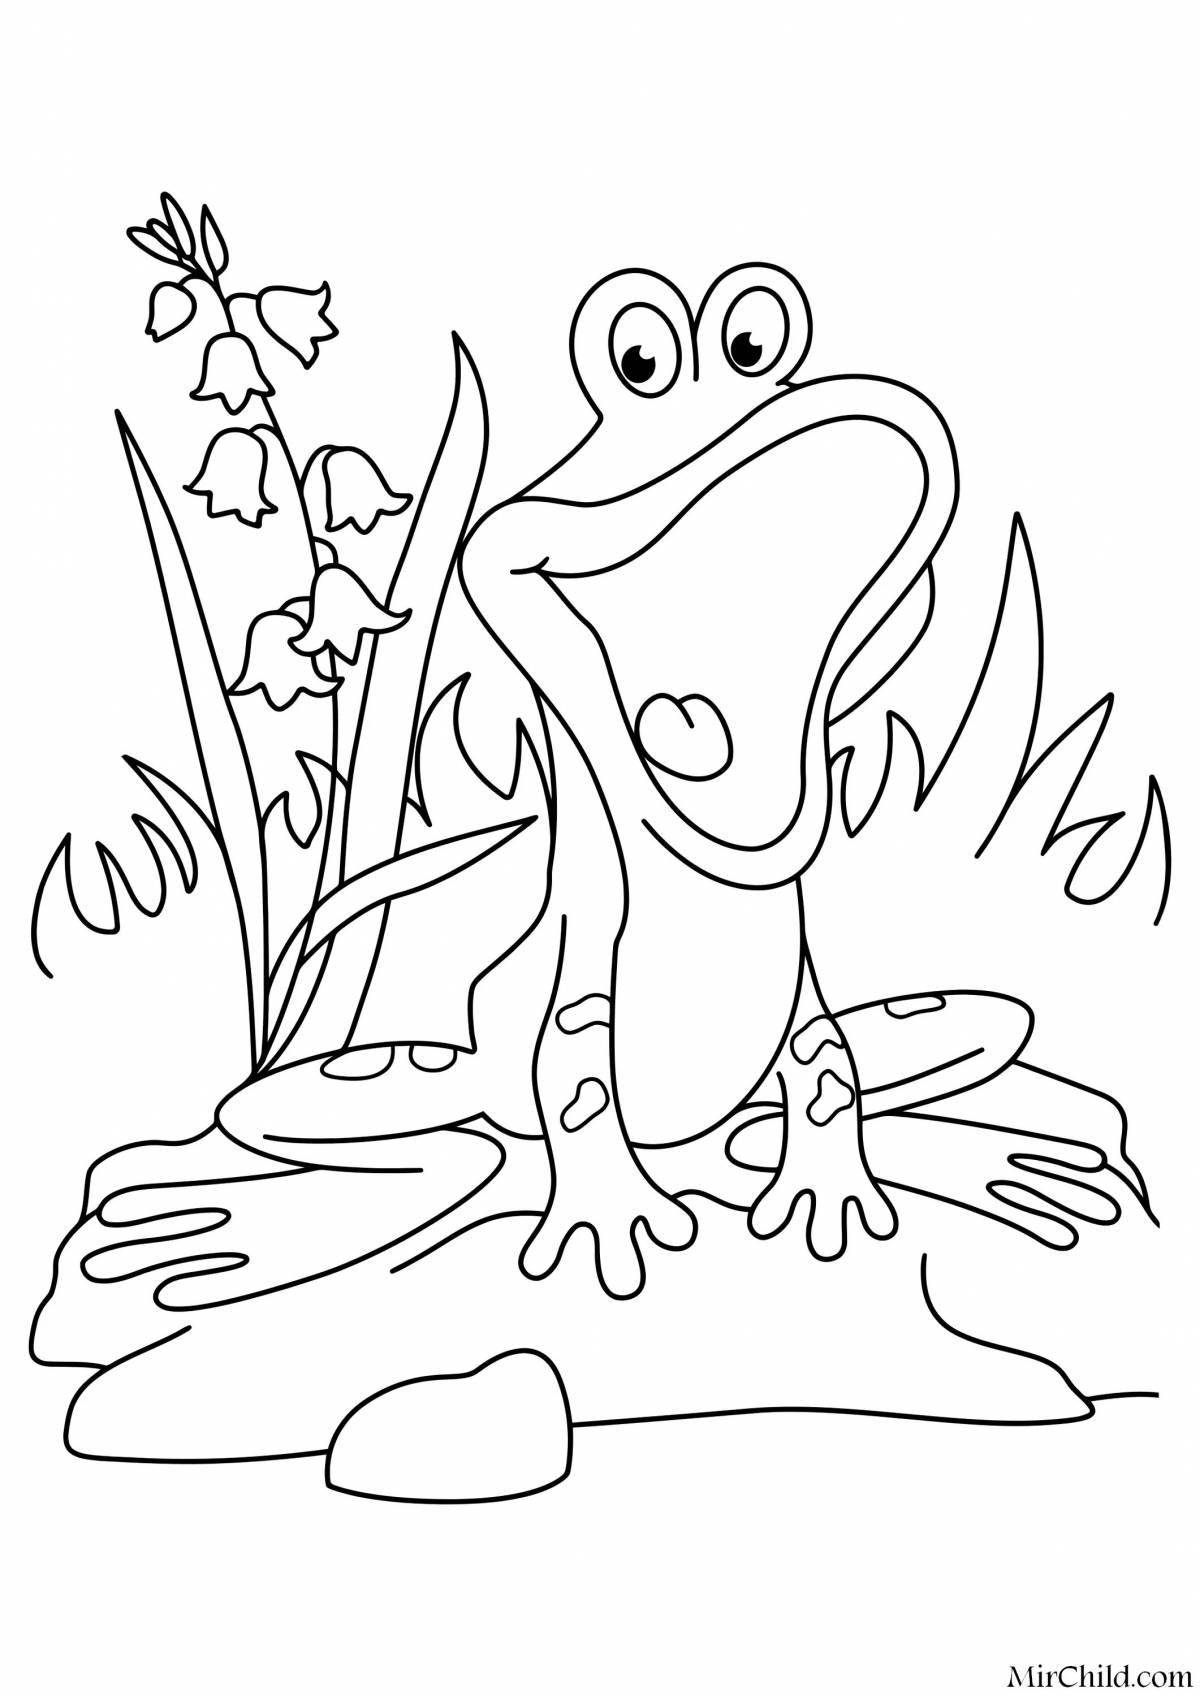 Cute frog coloring book for kids